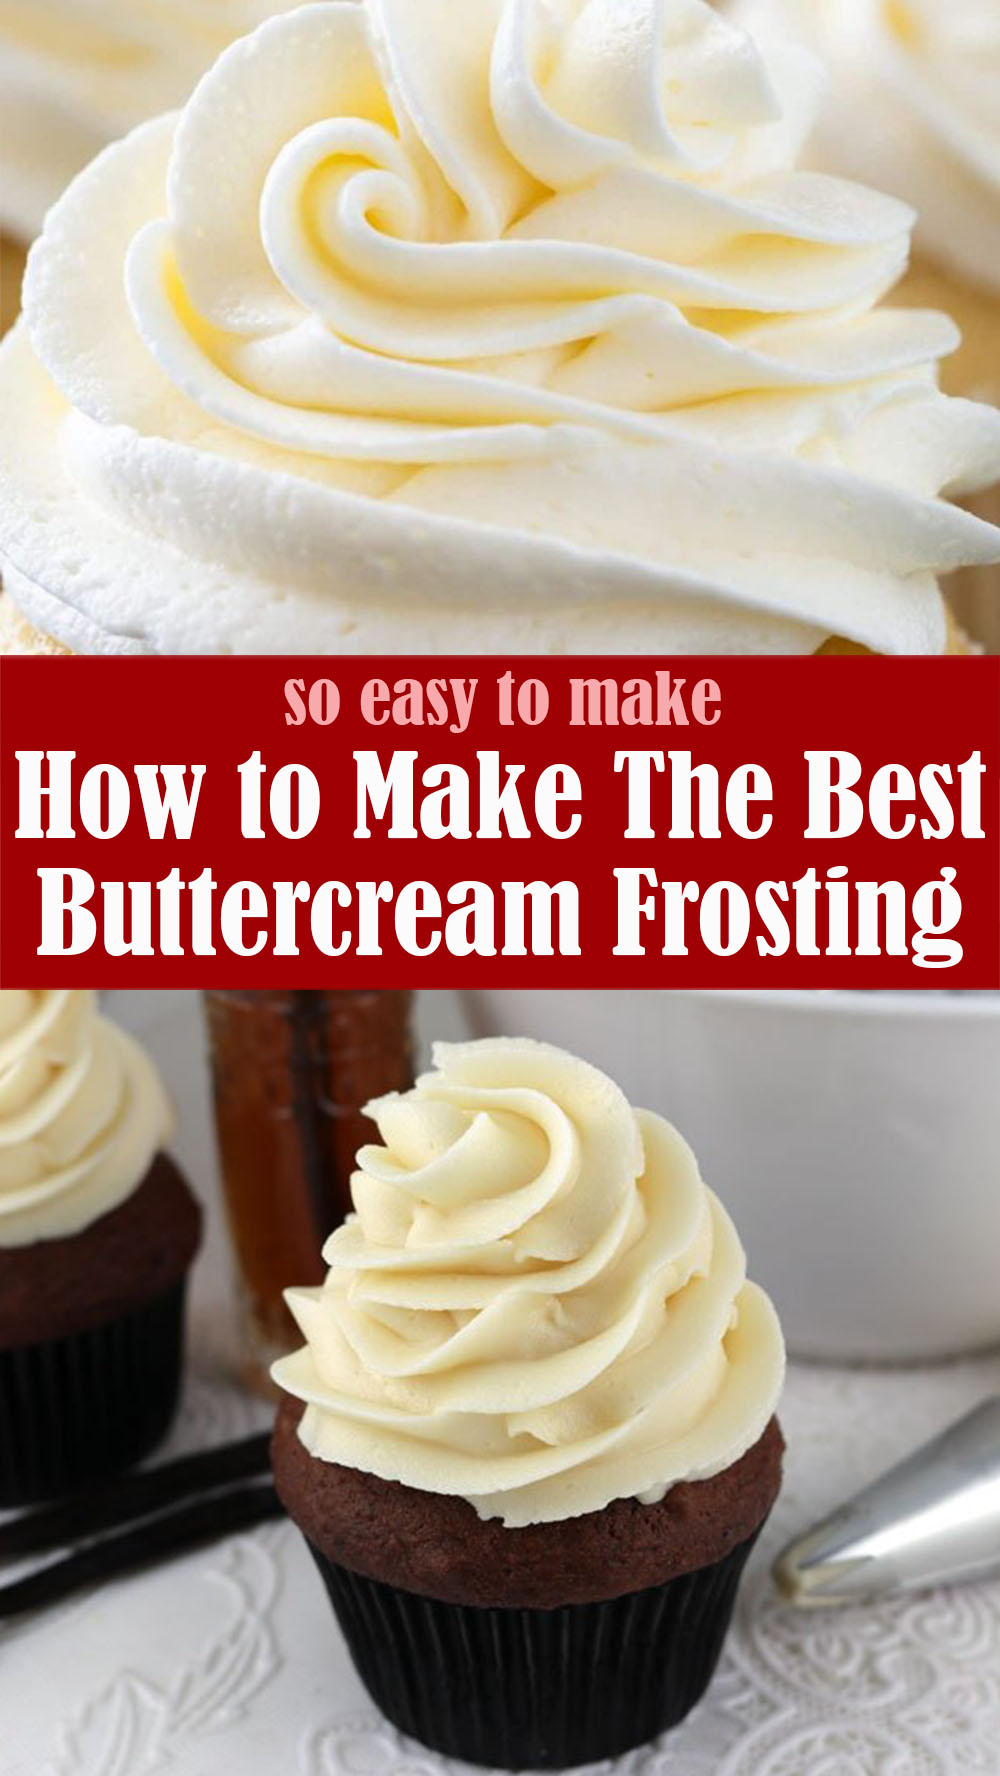 How to Make The Best Buttercream Frosting